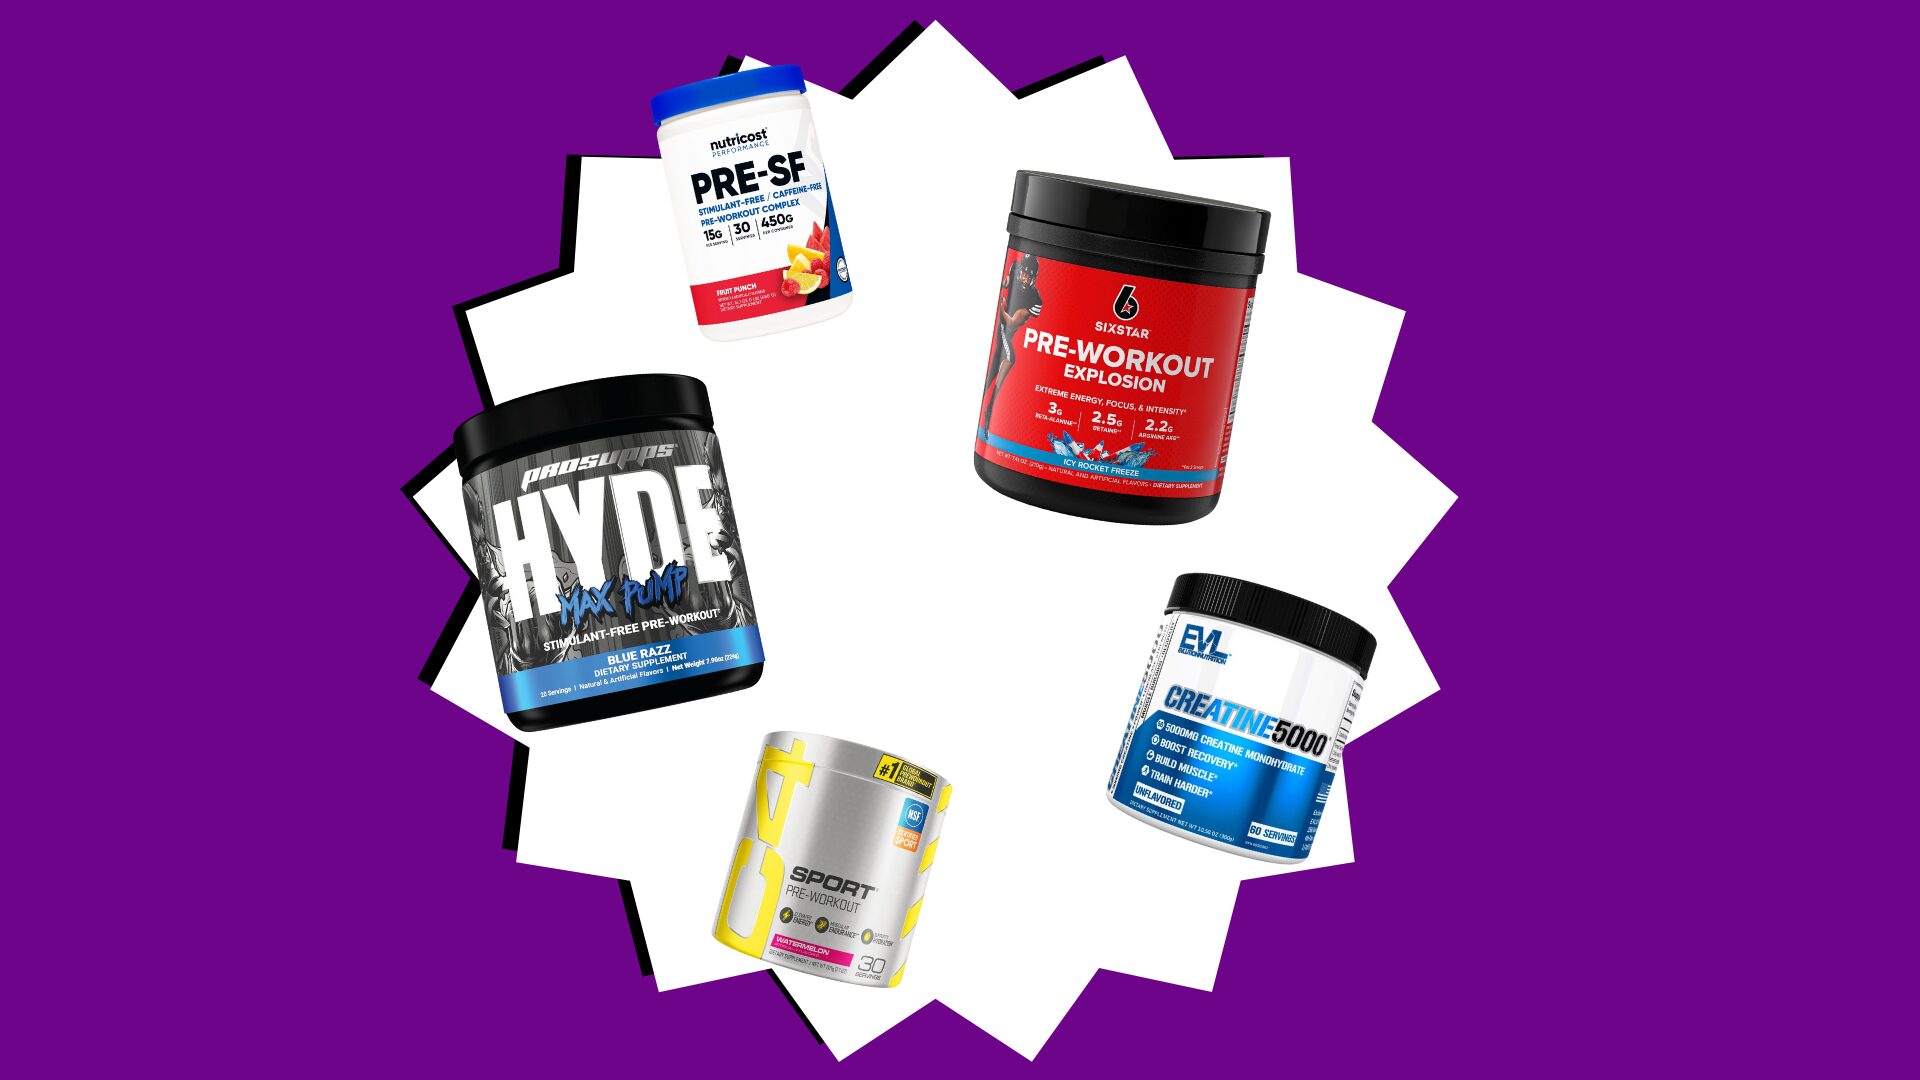 Top 5 Pre-Workout Powders: A Comparative Review